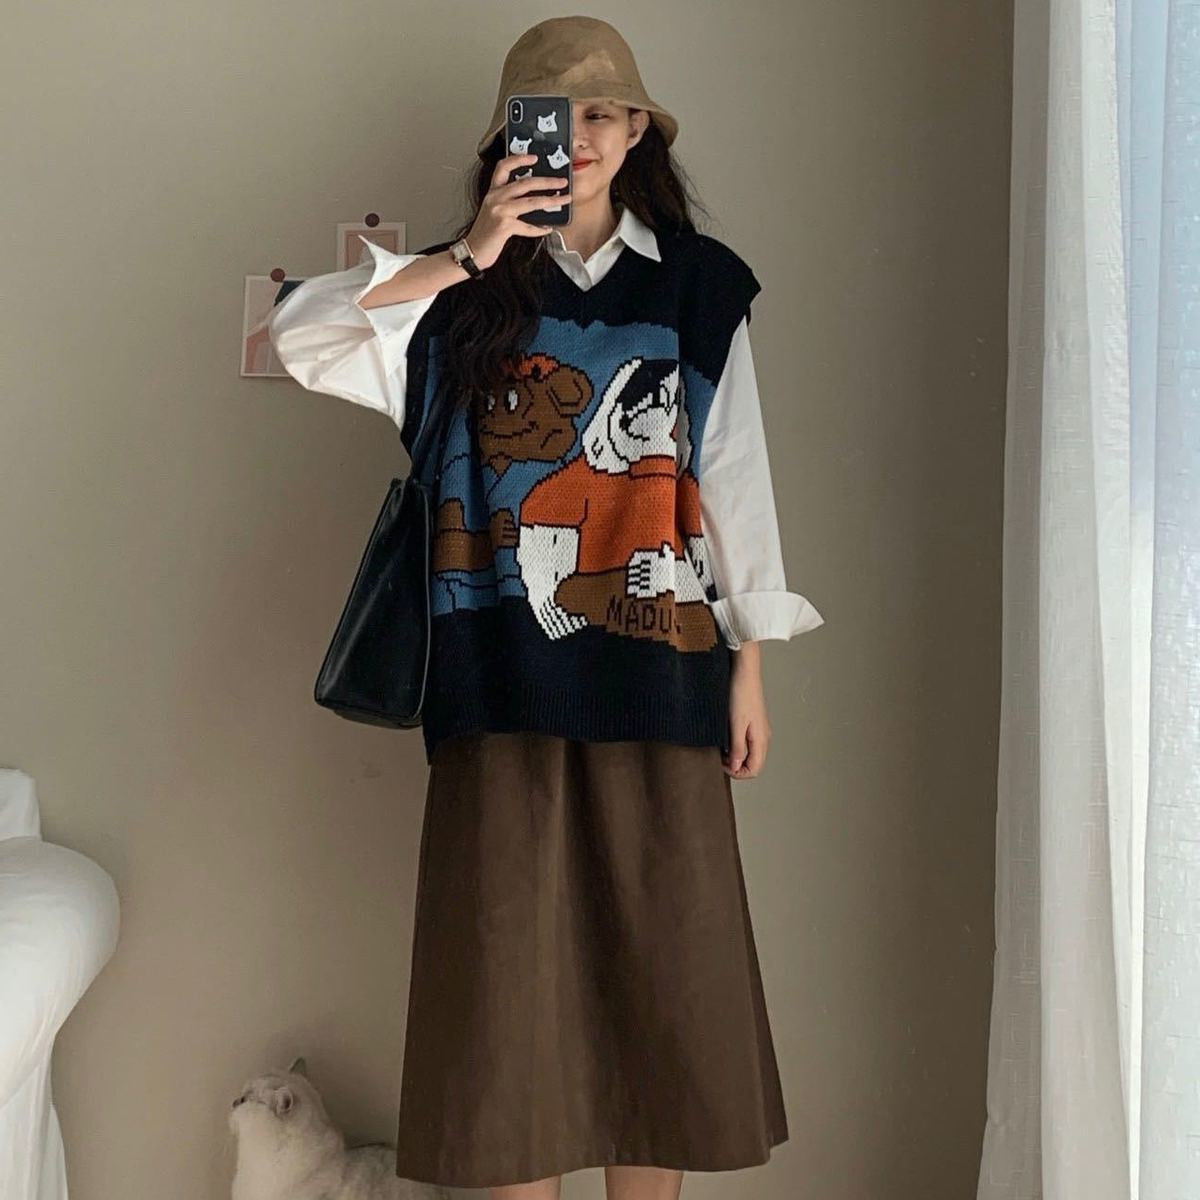 One-piece/suit spring and autumn V-neck knitted layered sweater loose vest vest student + long-sleeved shirt two-piece set